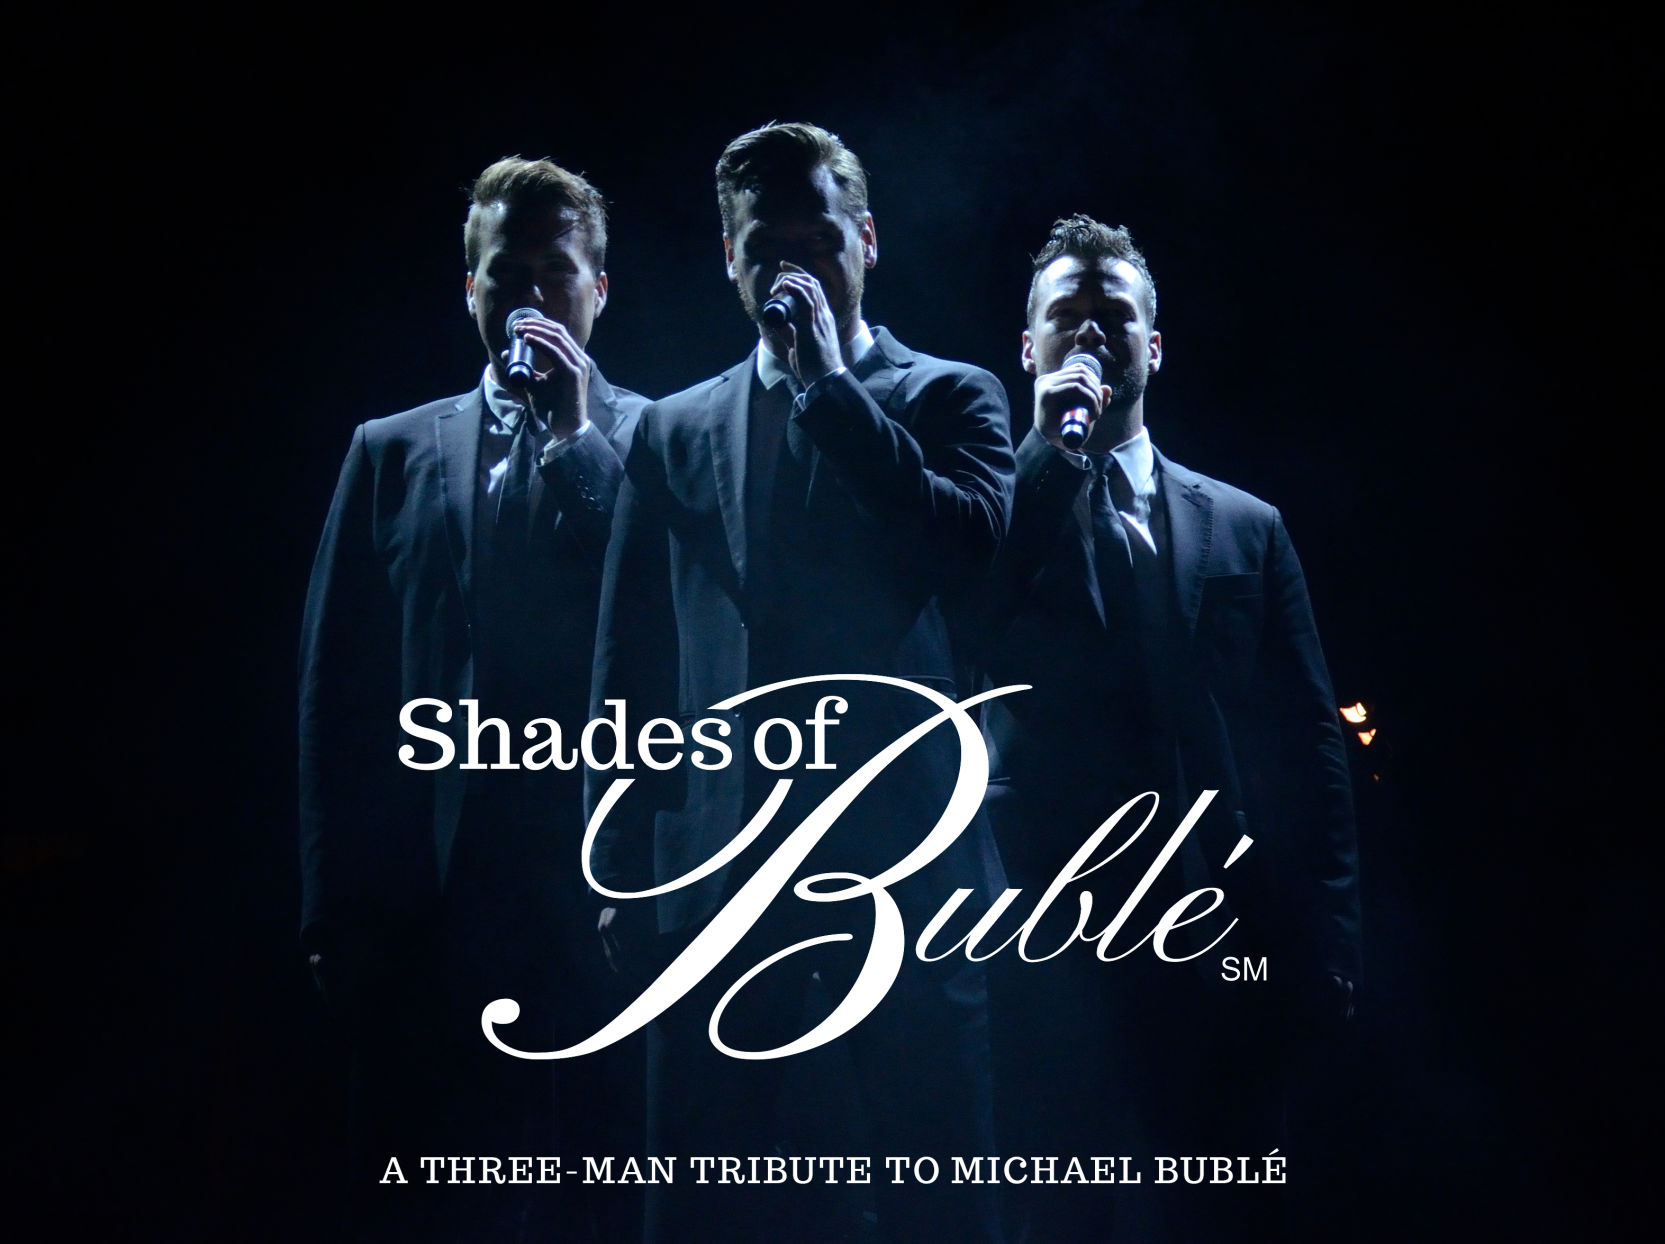 Shades of Bublé